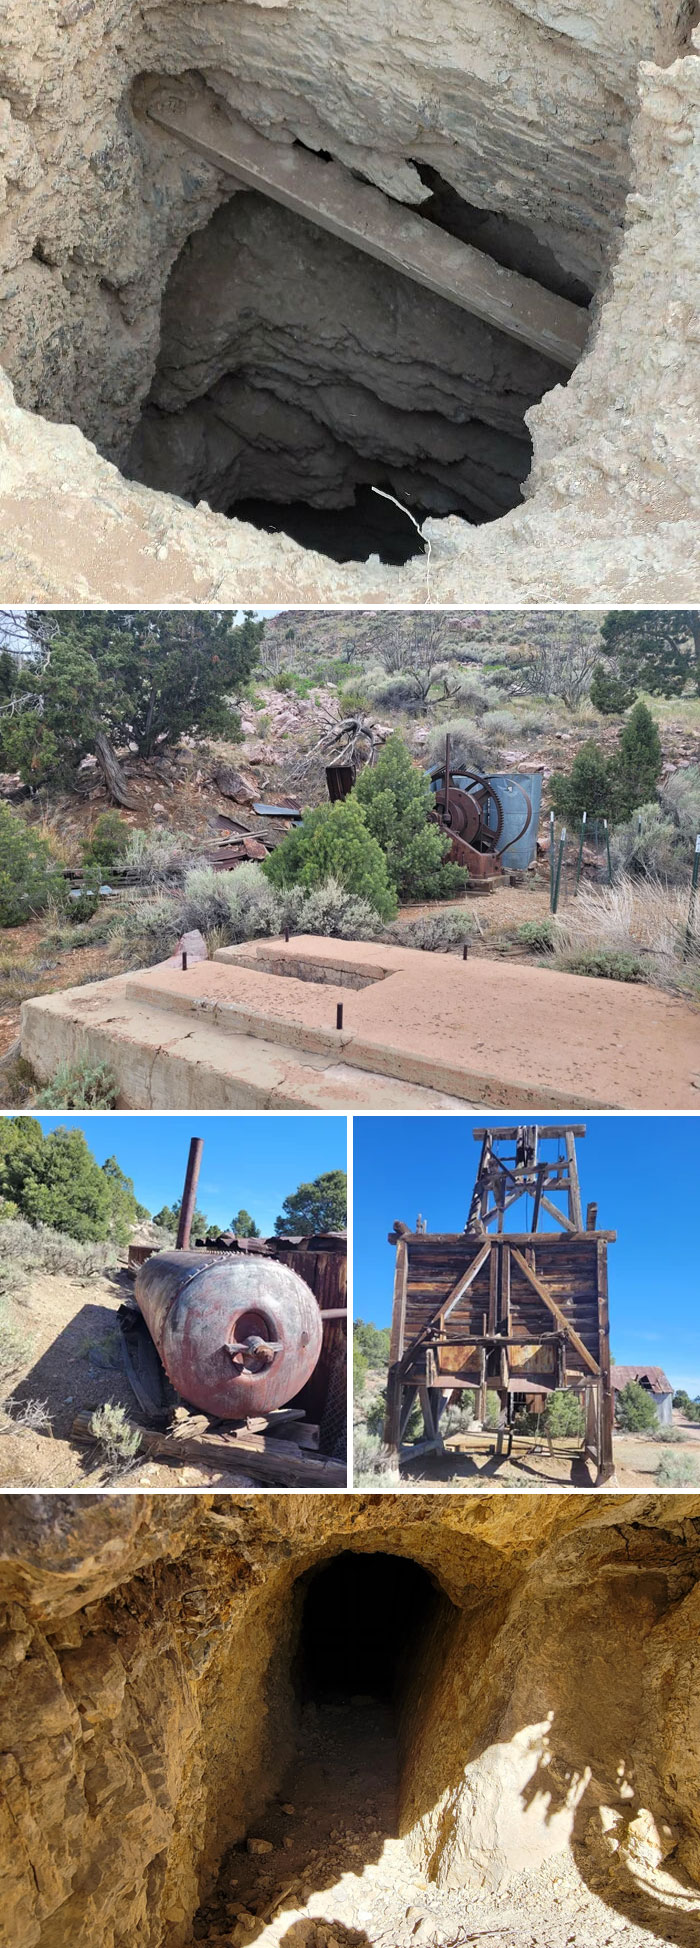 I'm Working For My State's Abandoned Mines Program. Here Are Some Of The Interesting Stuff